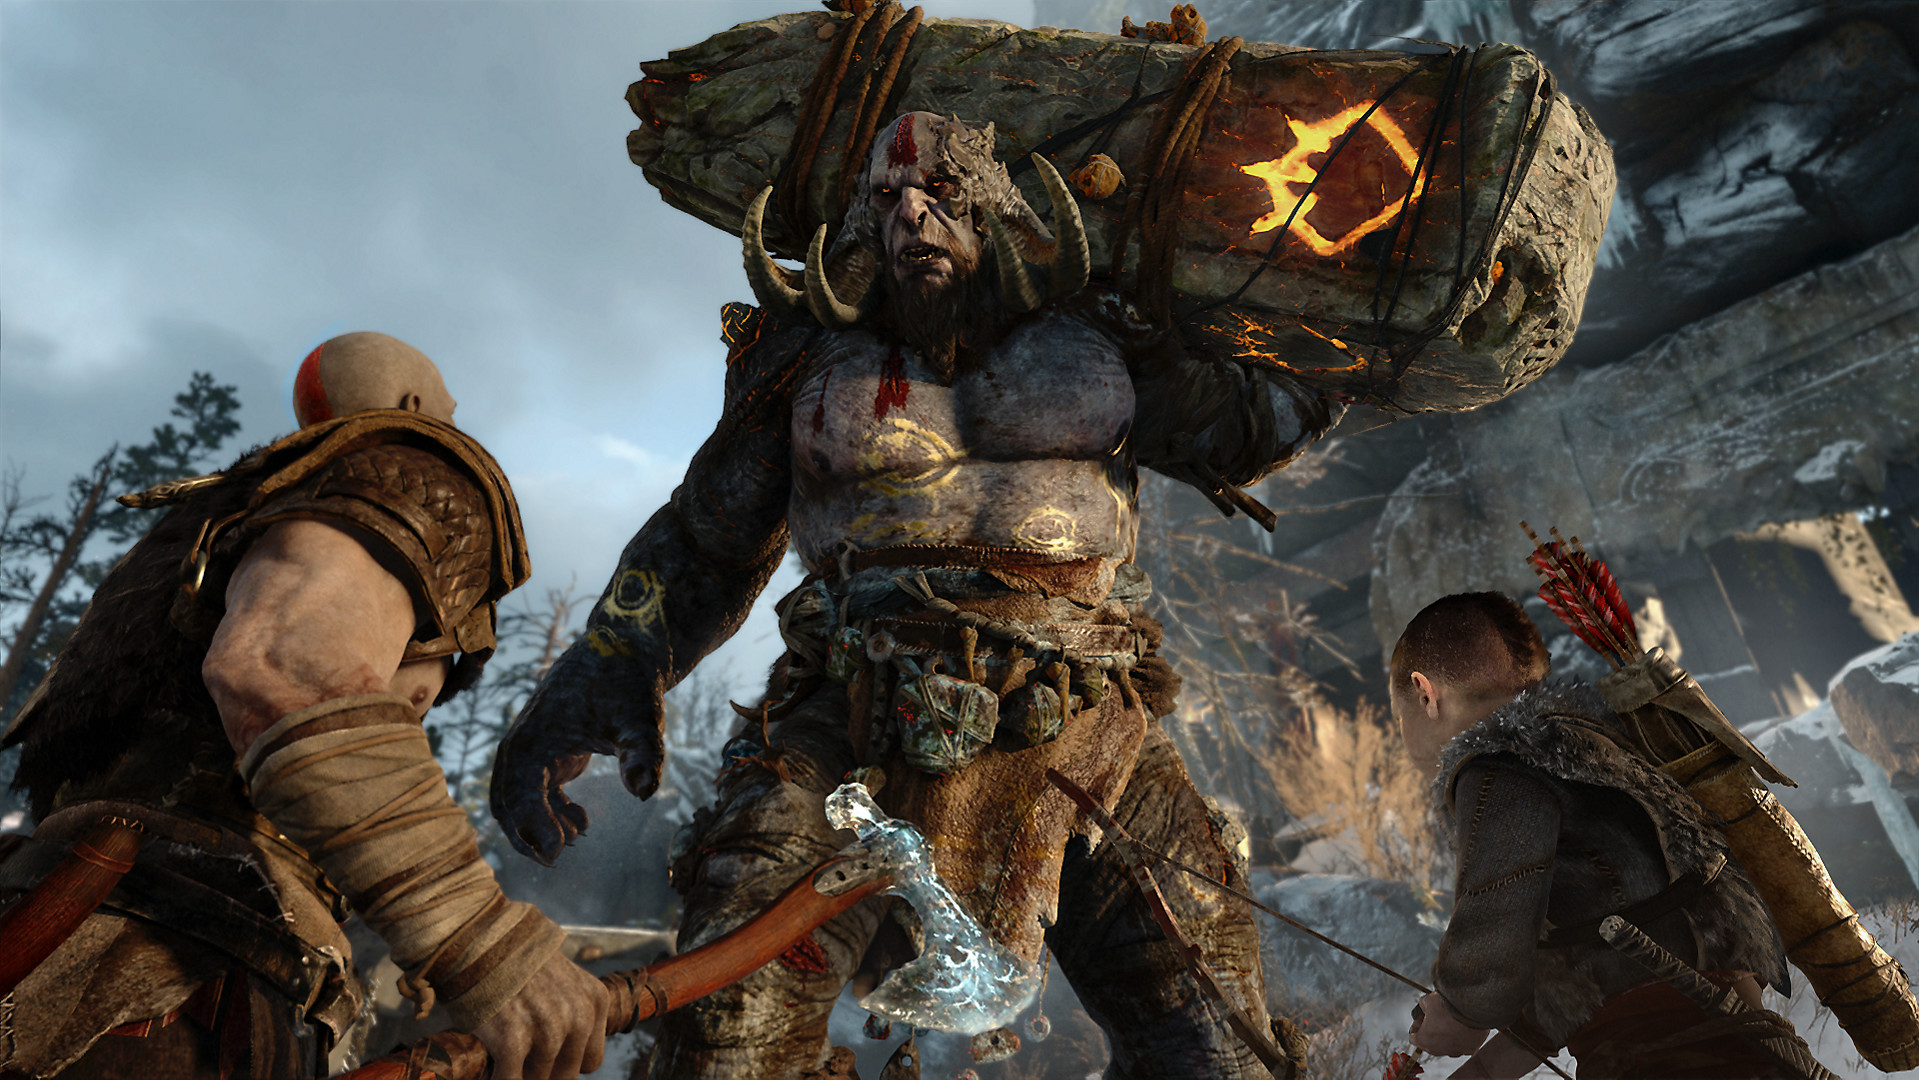 Kratos faces a troll in God of War